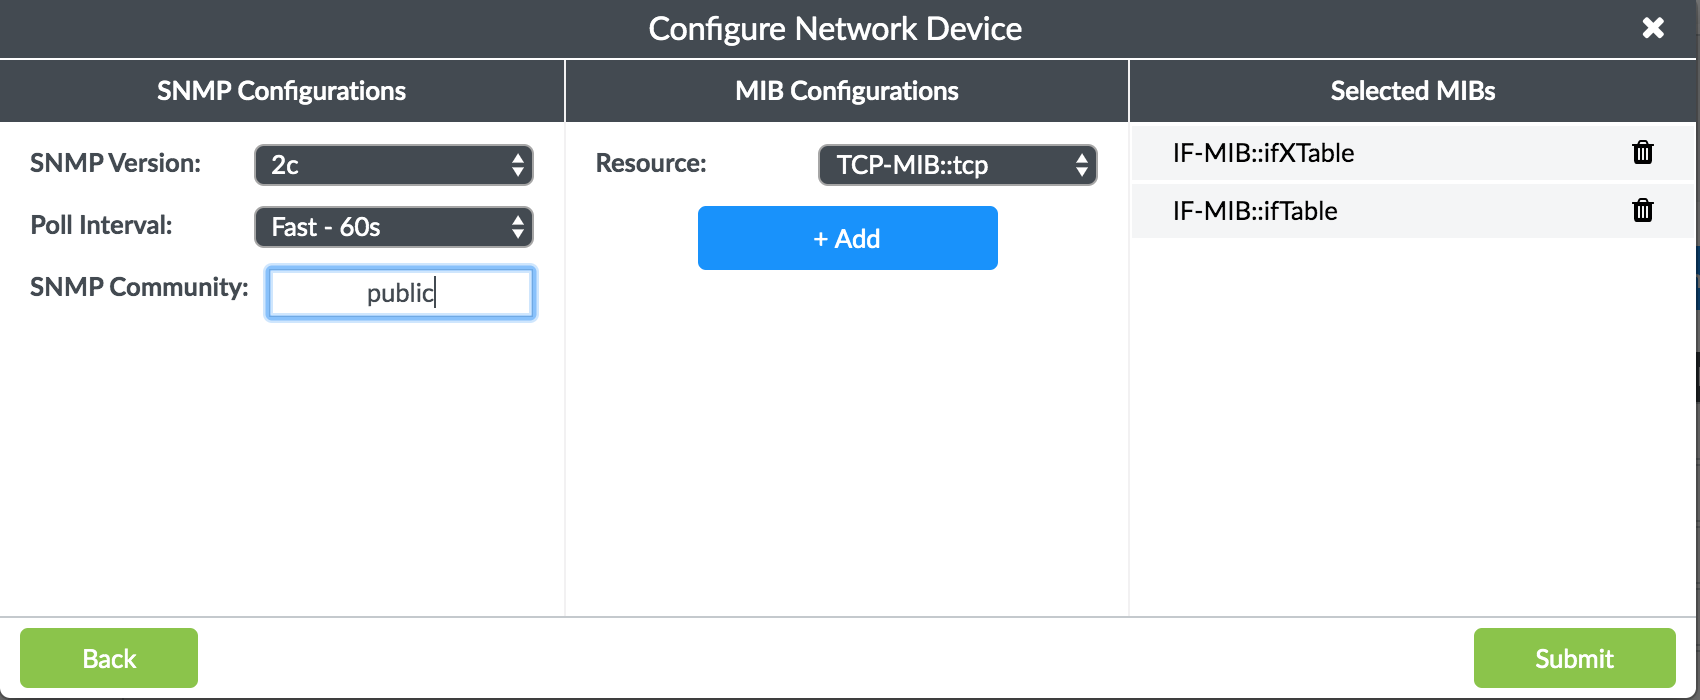 SNMP Configuration Parameters in Configure Network Device Page